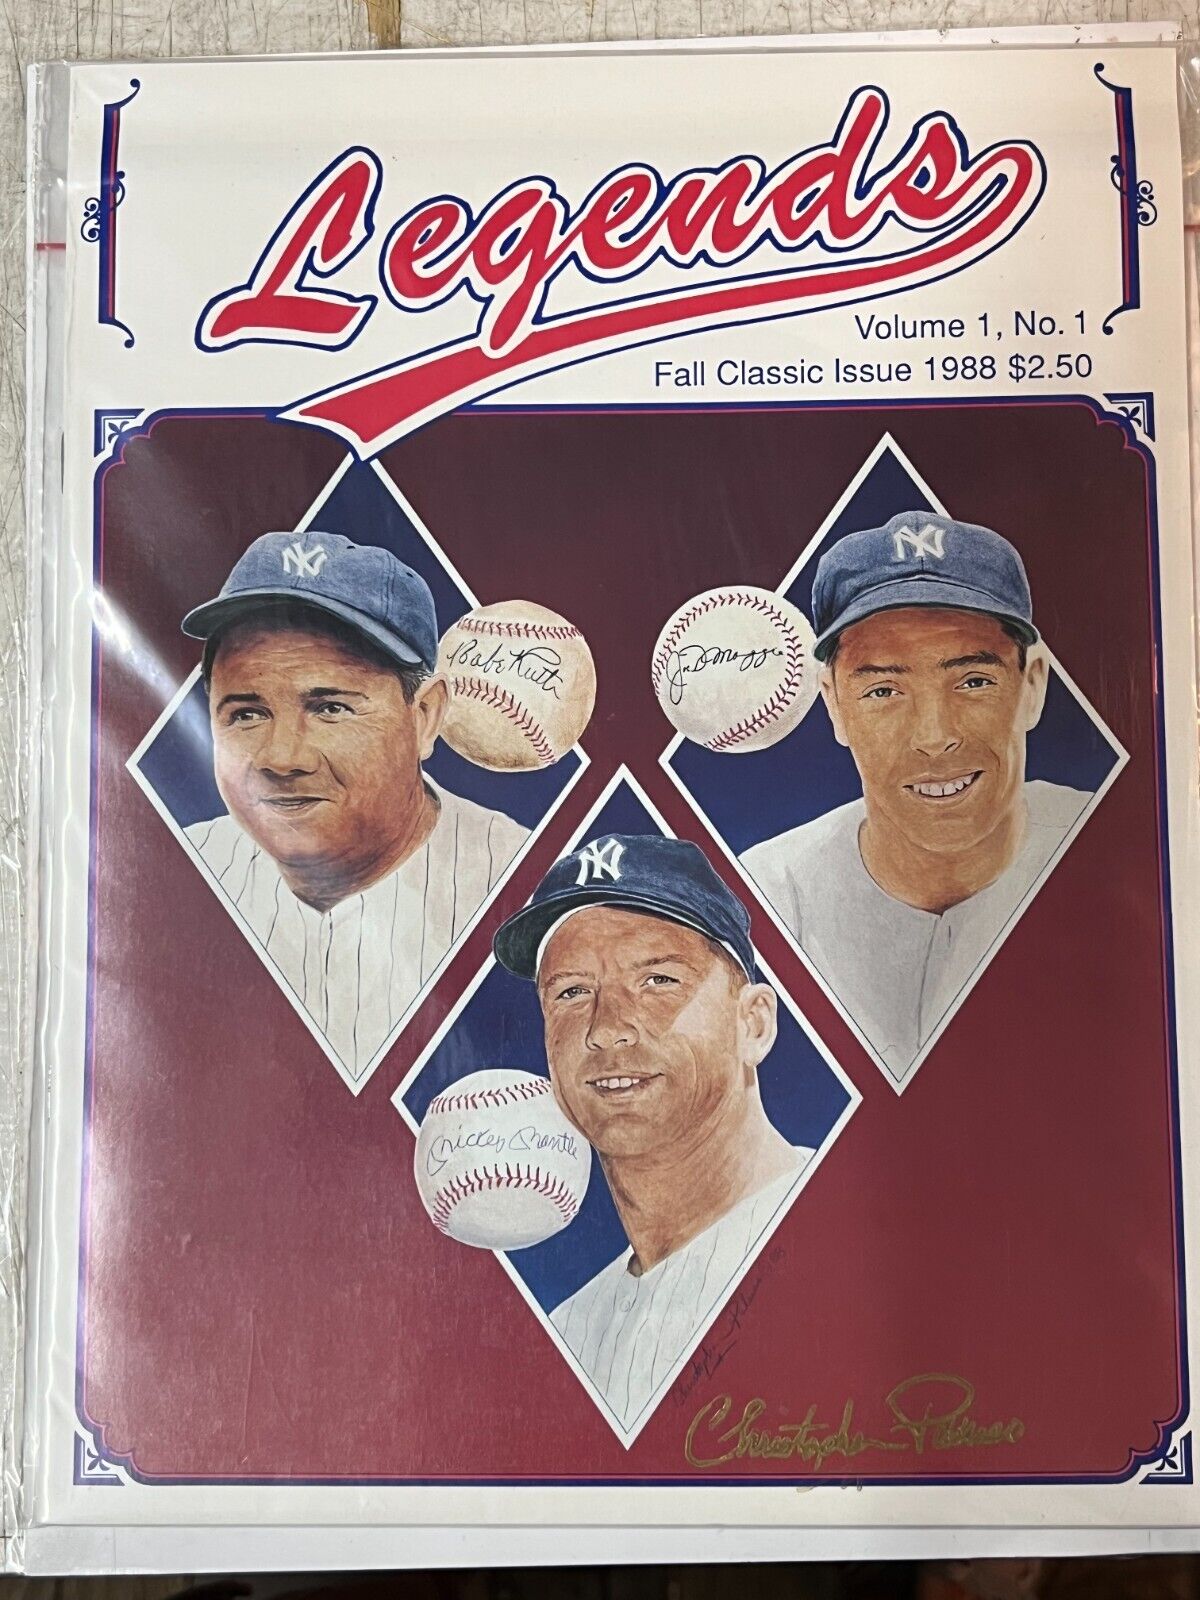 1988 Legends Magazine Fall Classic Issue Vol 1 No 1 Signed By Christopher Paluso